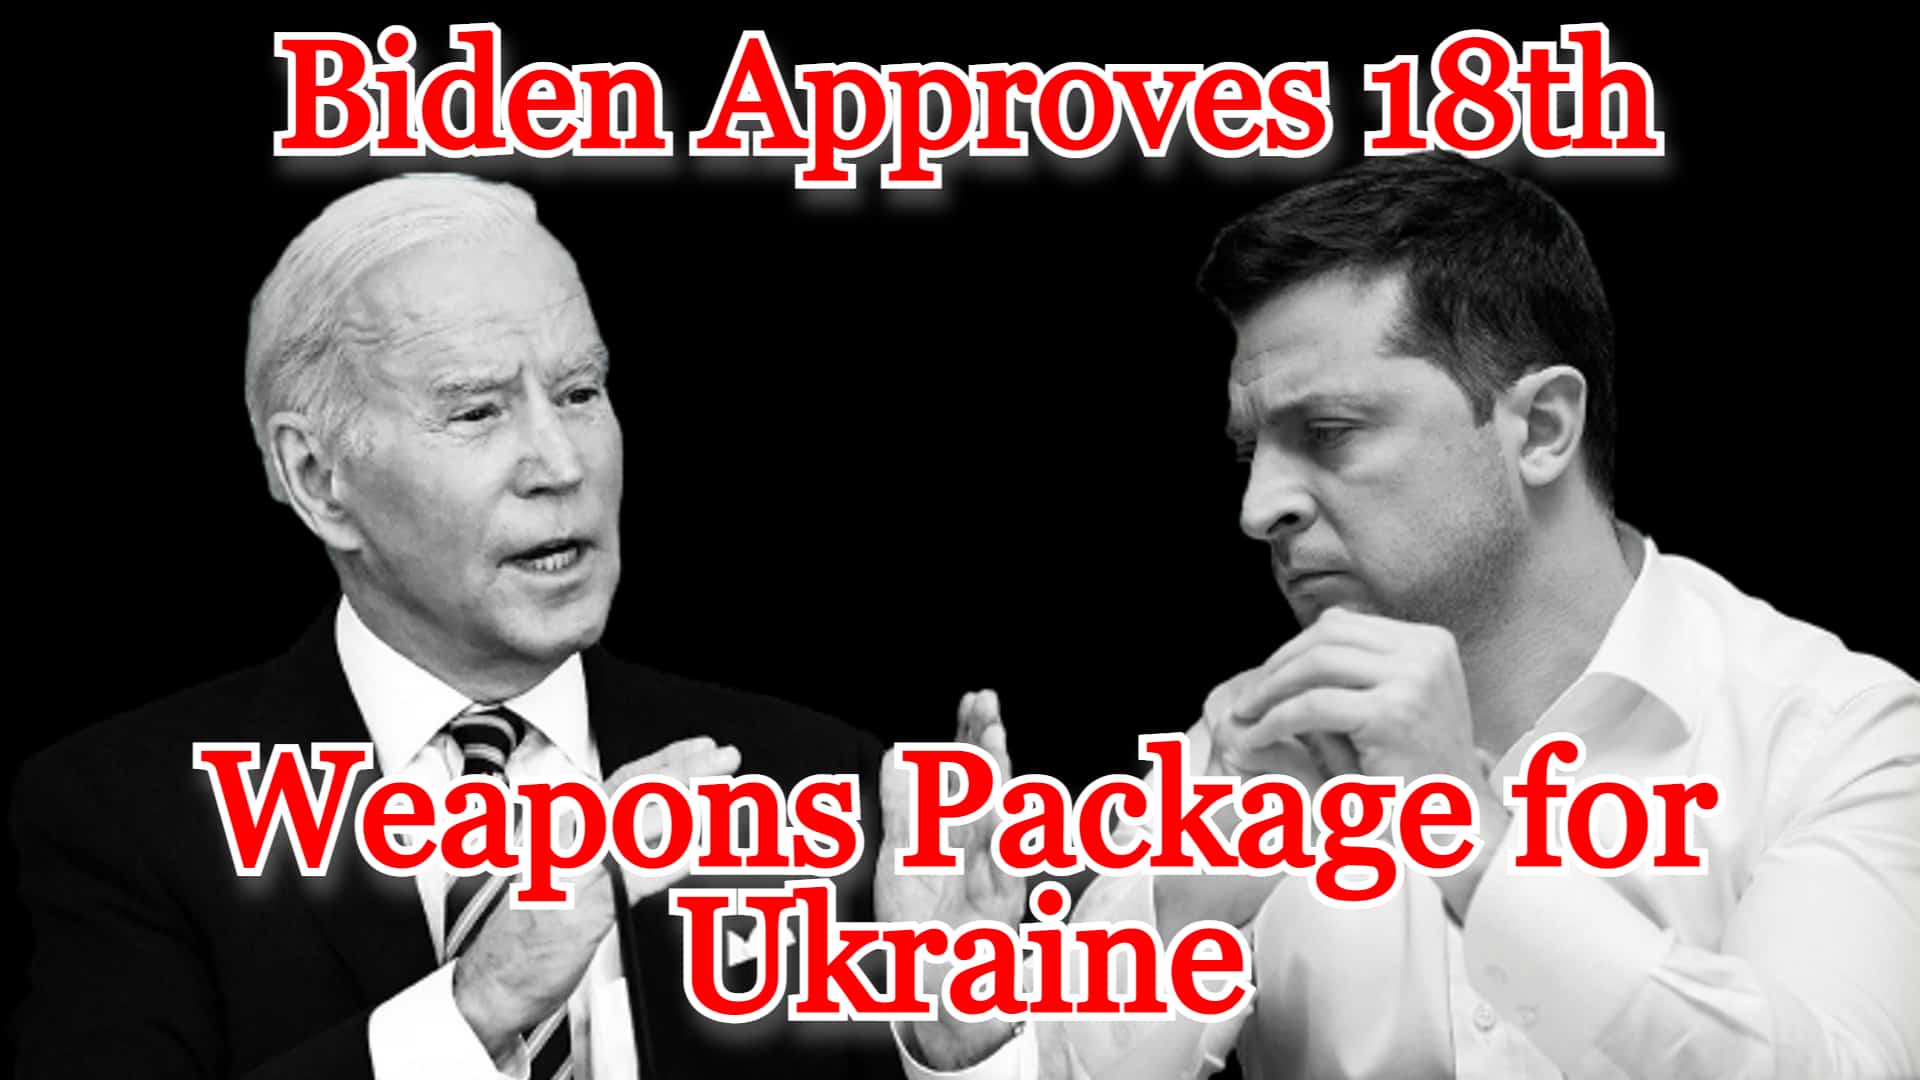 COI #314: Biden Approves 18th Weapons Package for Ukraine